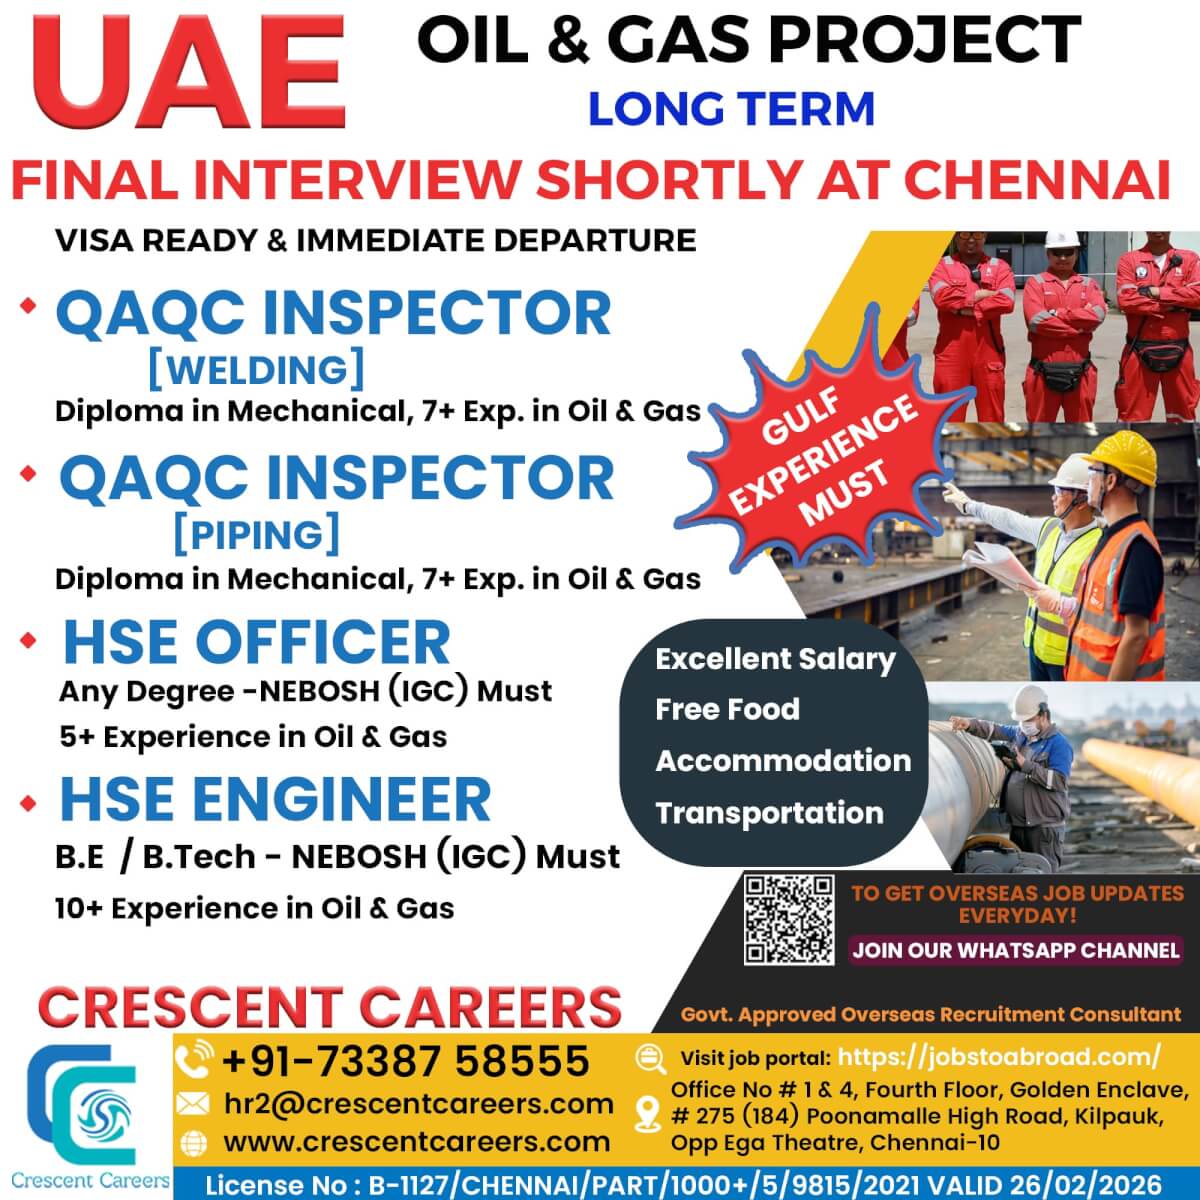 QAQC INSPECTOR [WELDING] / QAQC INSPECTOR [PIPING] / HSE OFFICER / HSE ENGINEER